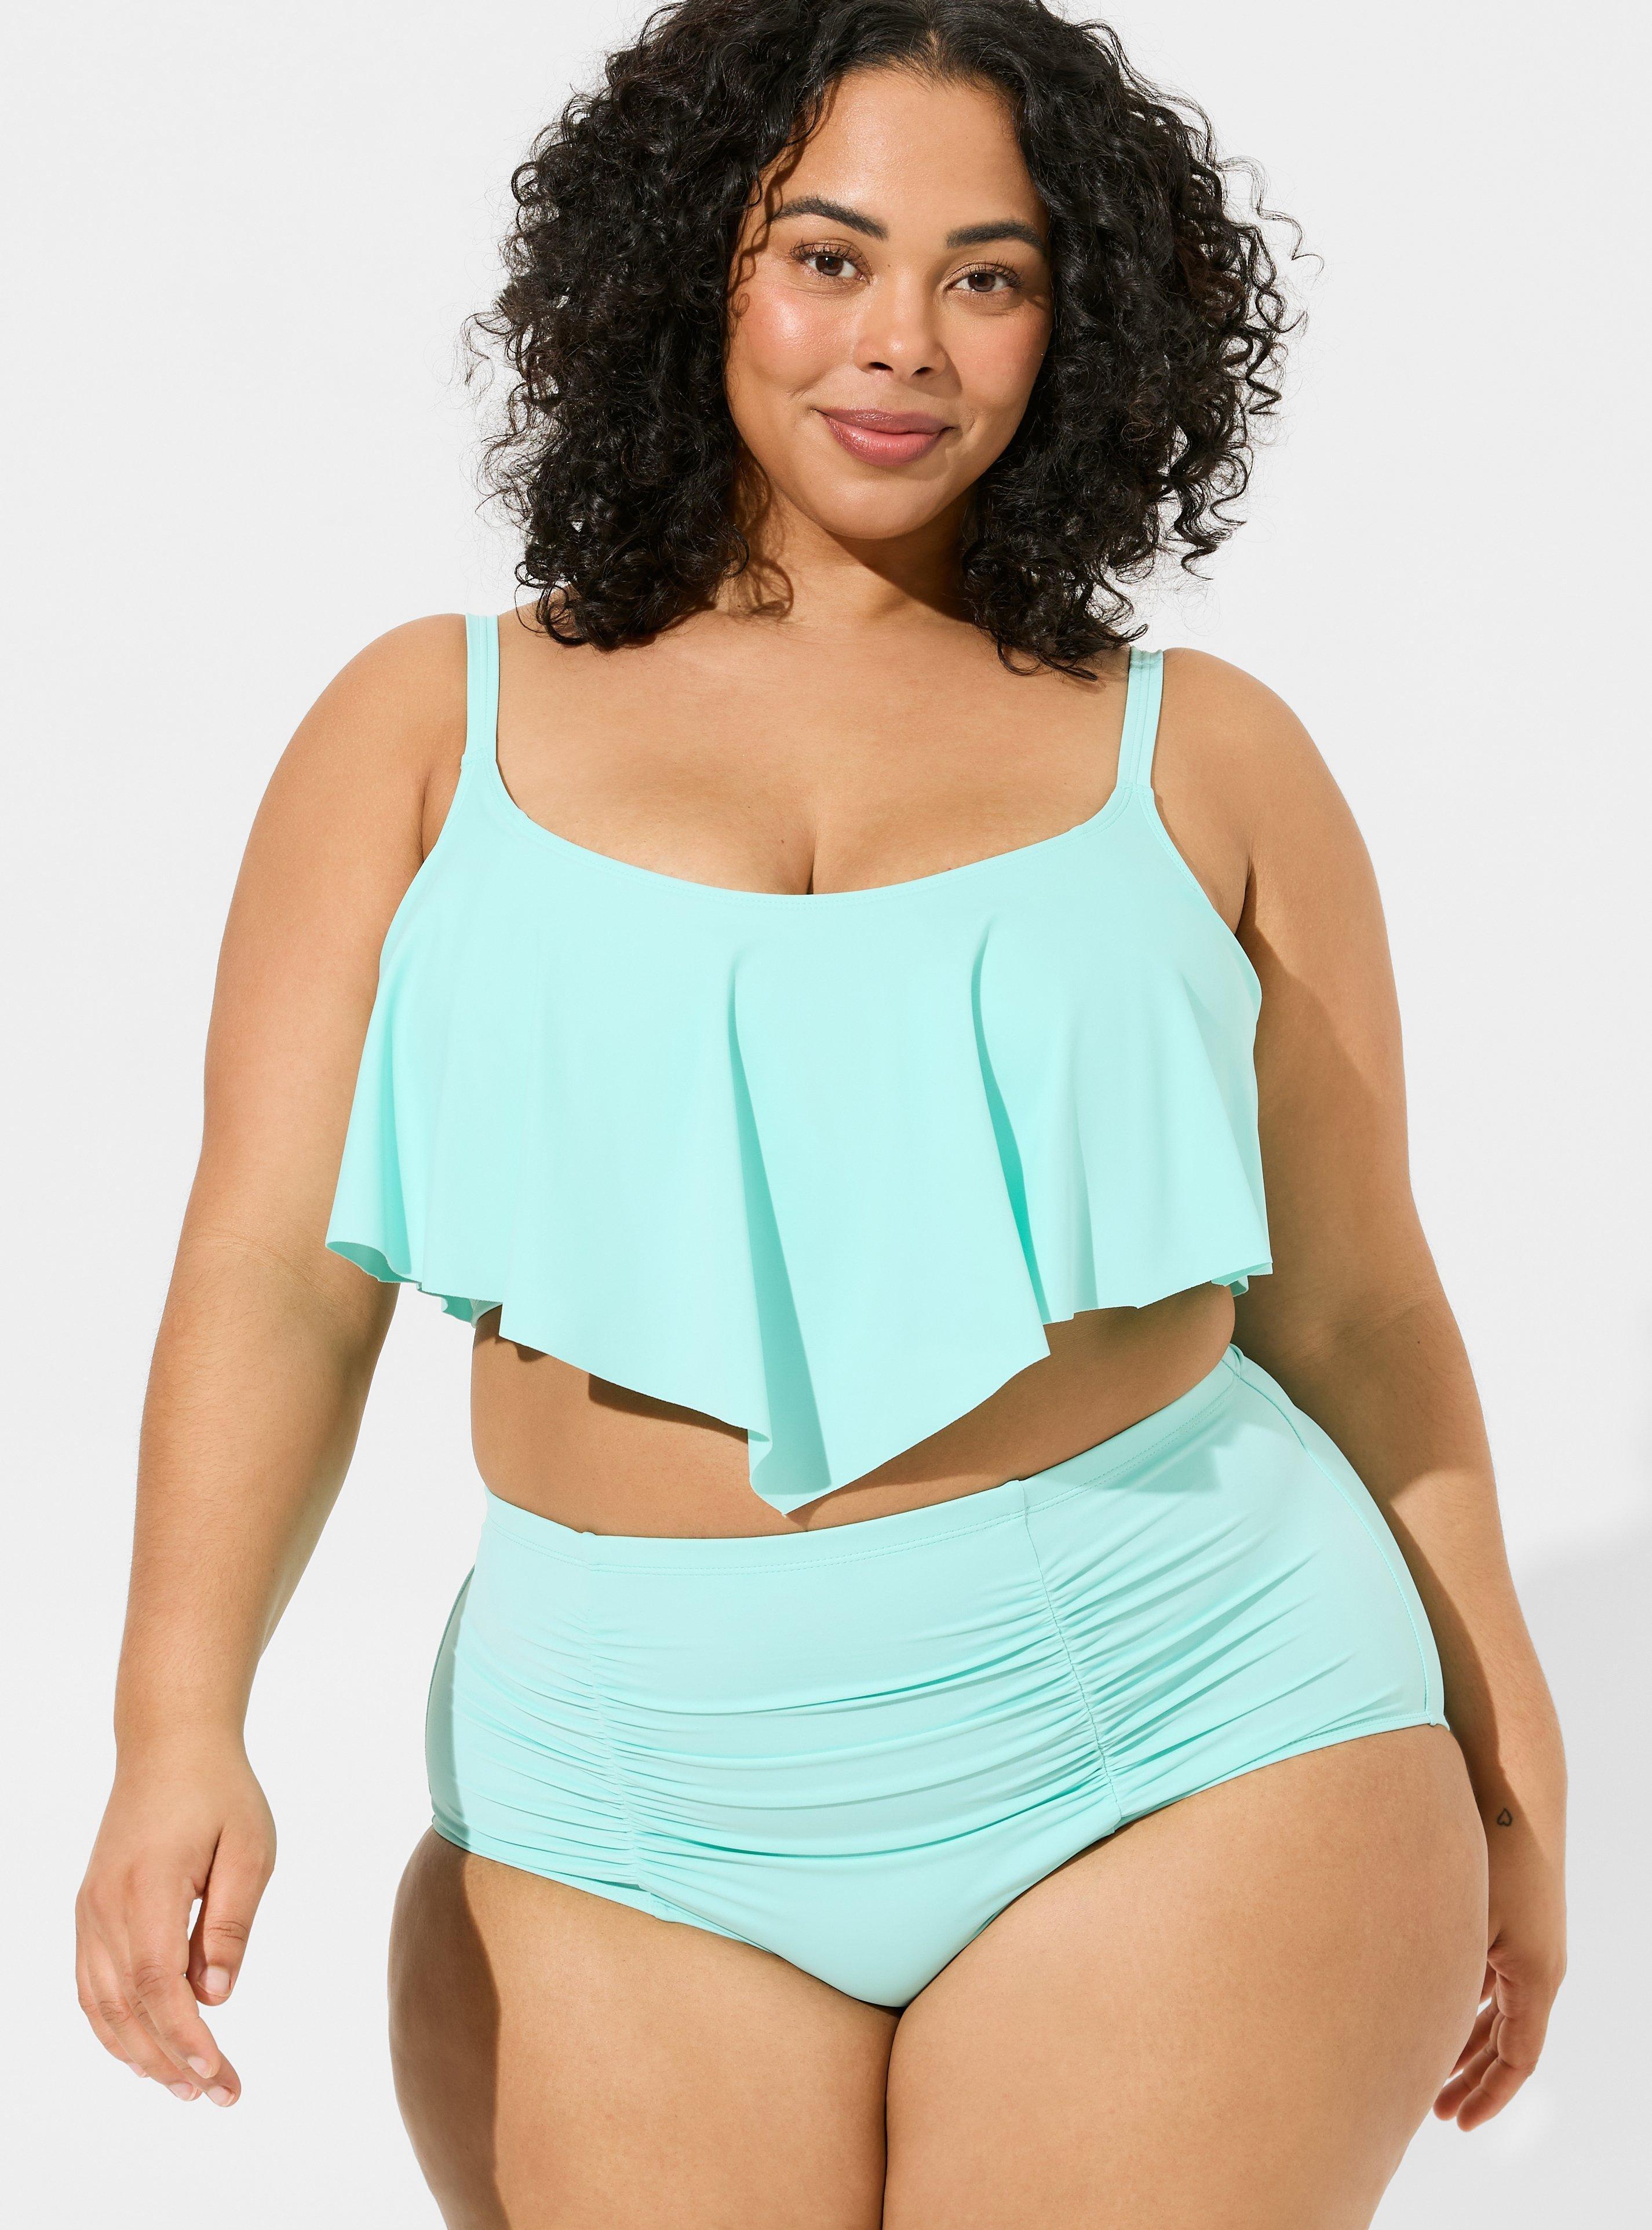 Clearance Plus Size Women's Tops on Sale, Catherines